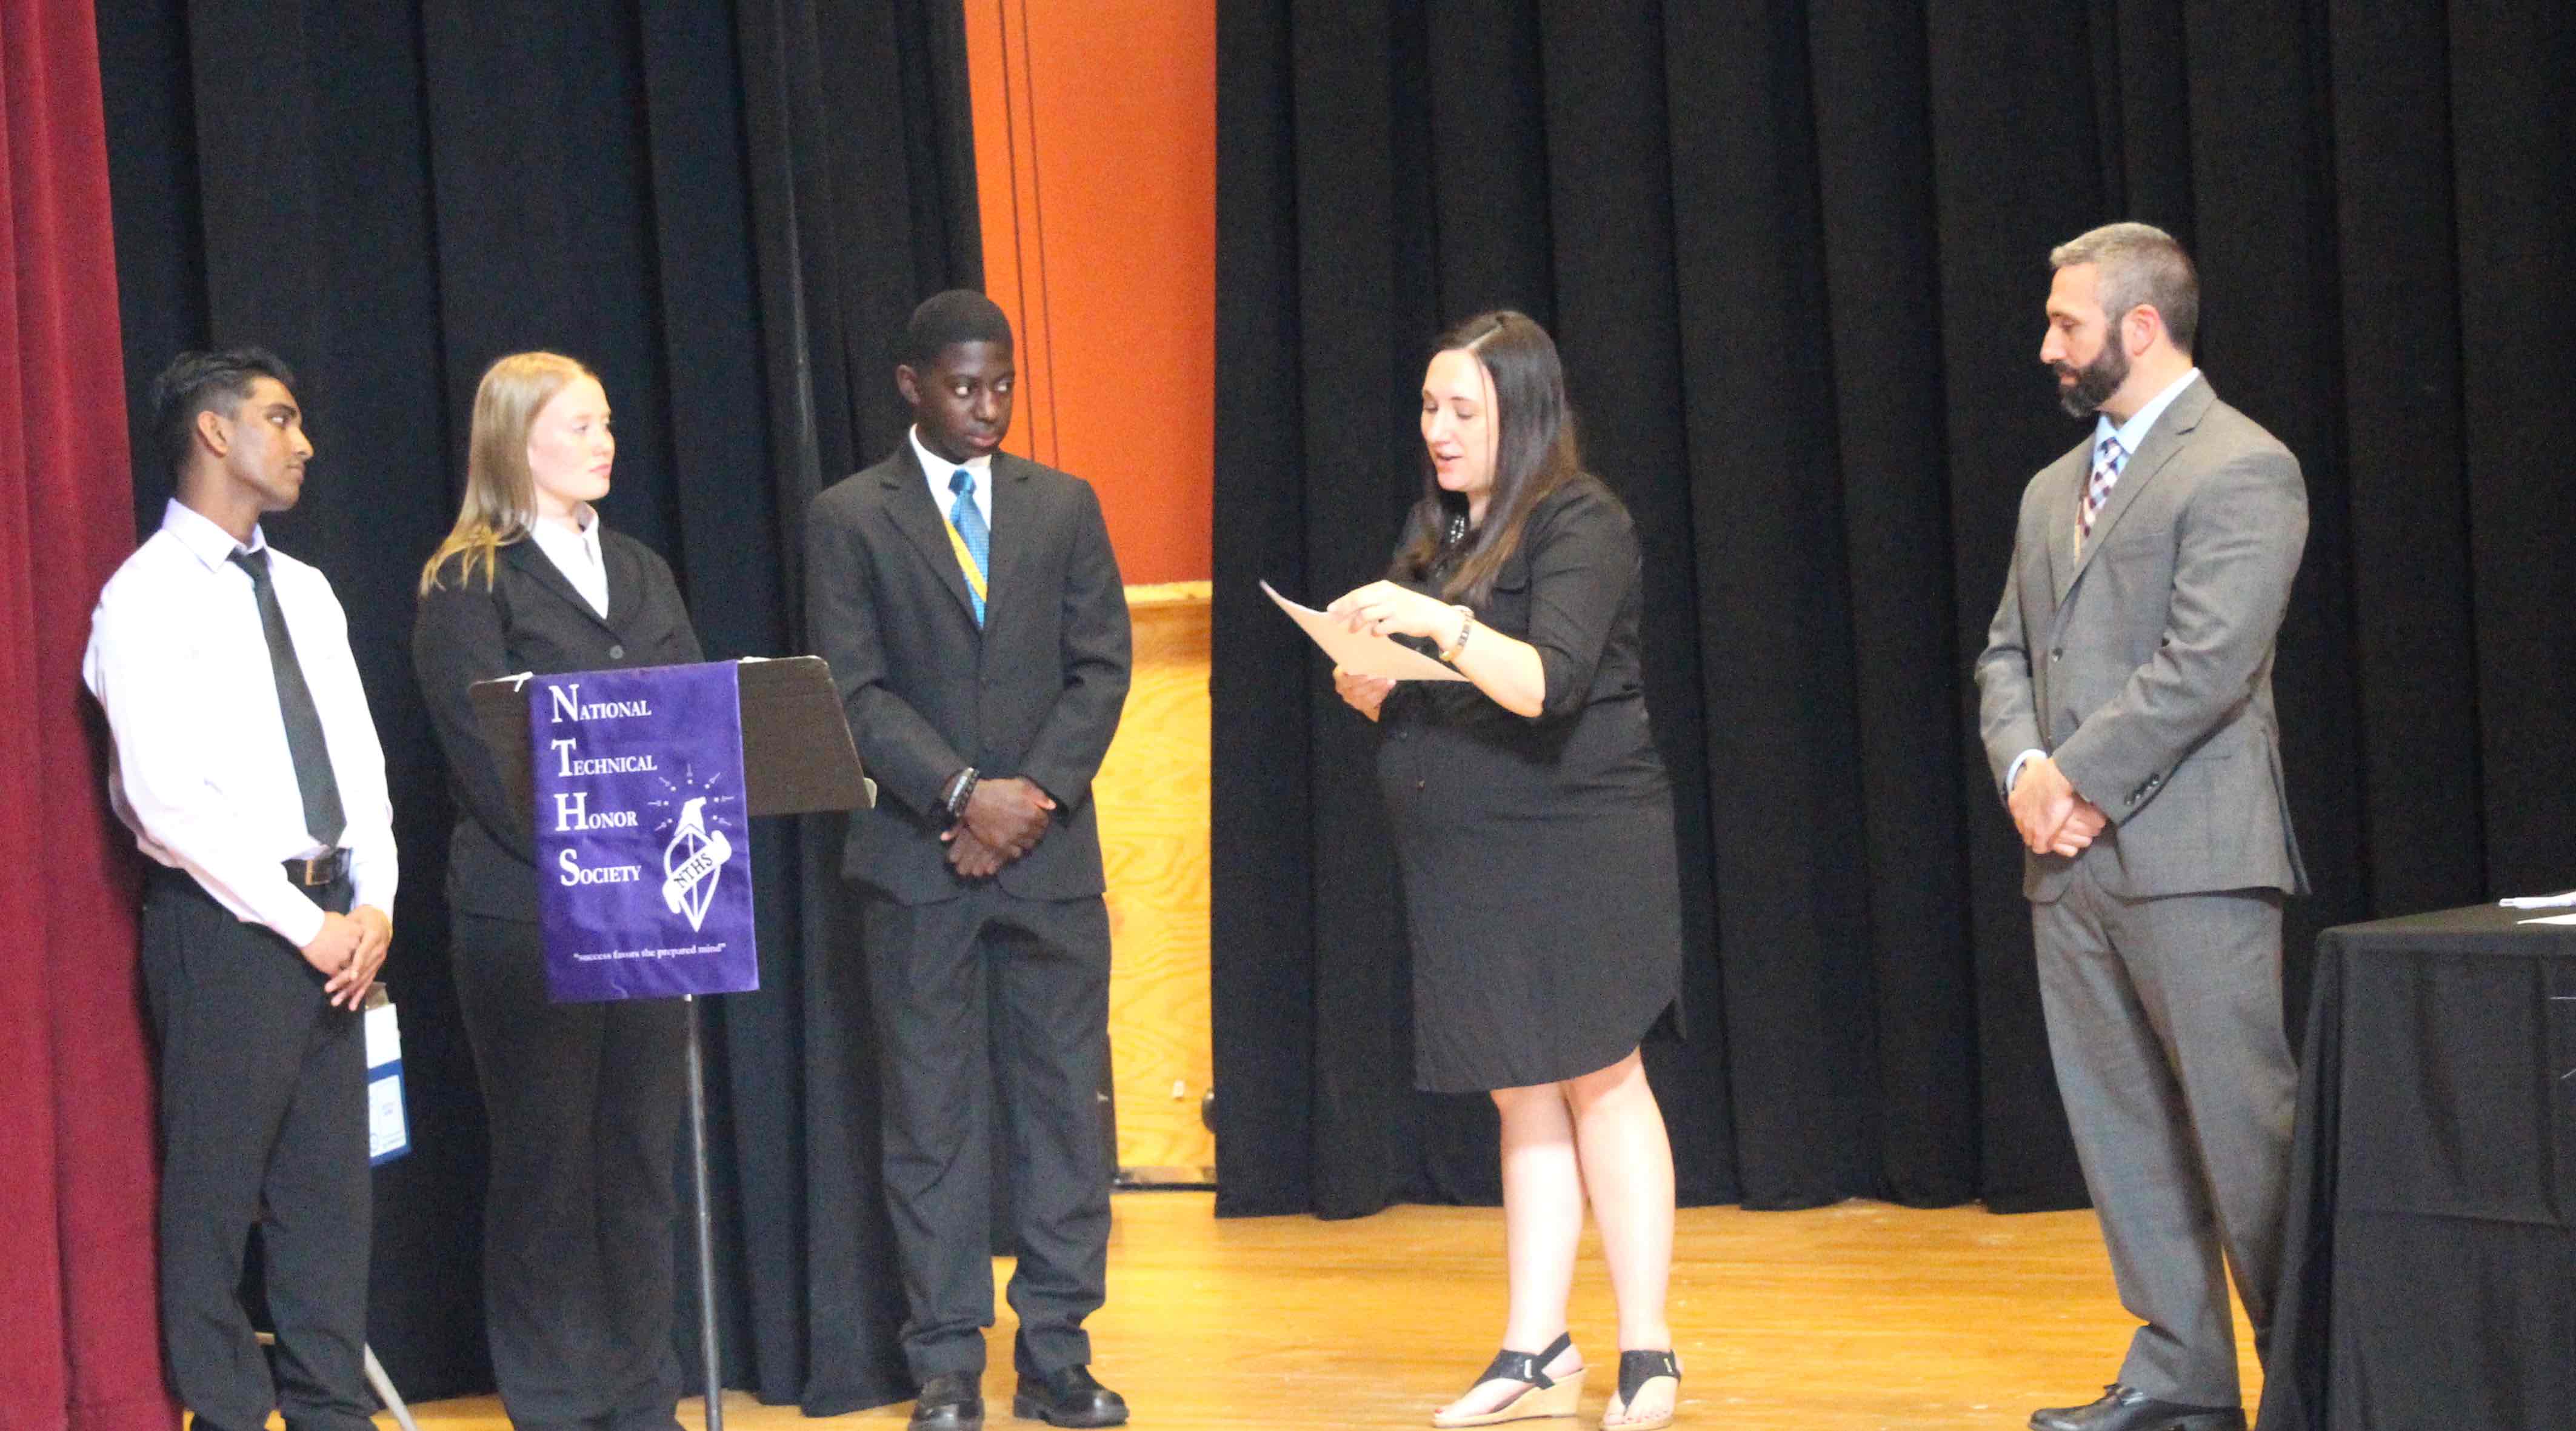 MHS students were inducted into the National Technical Honor Society